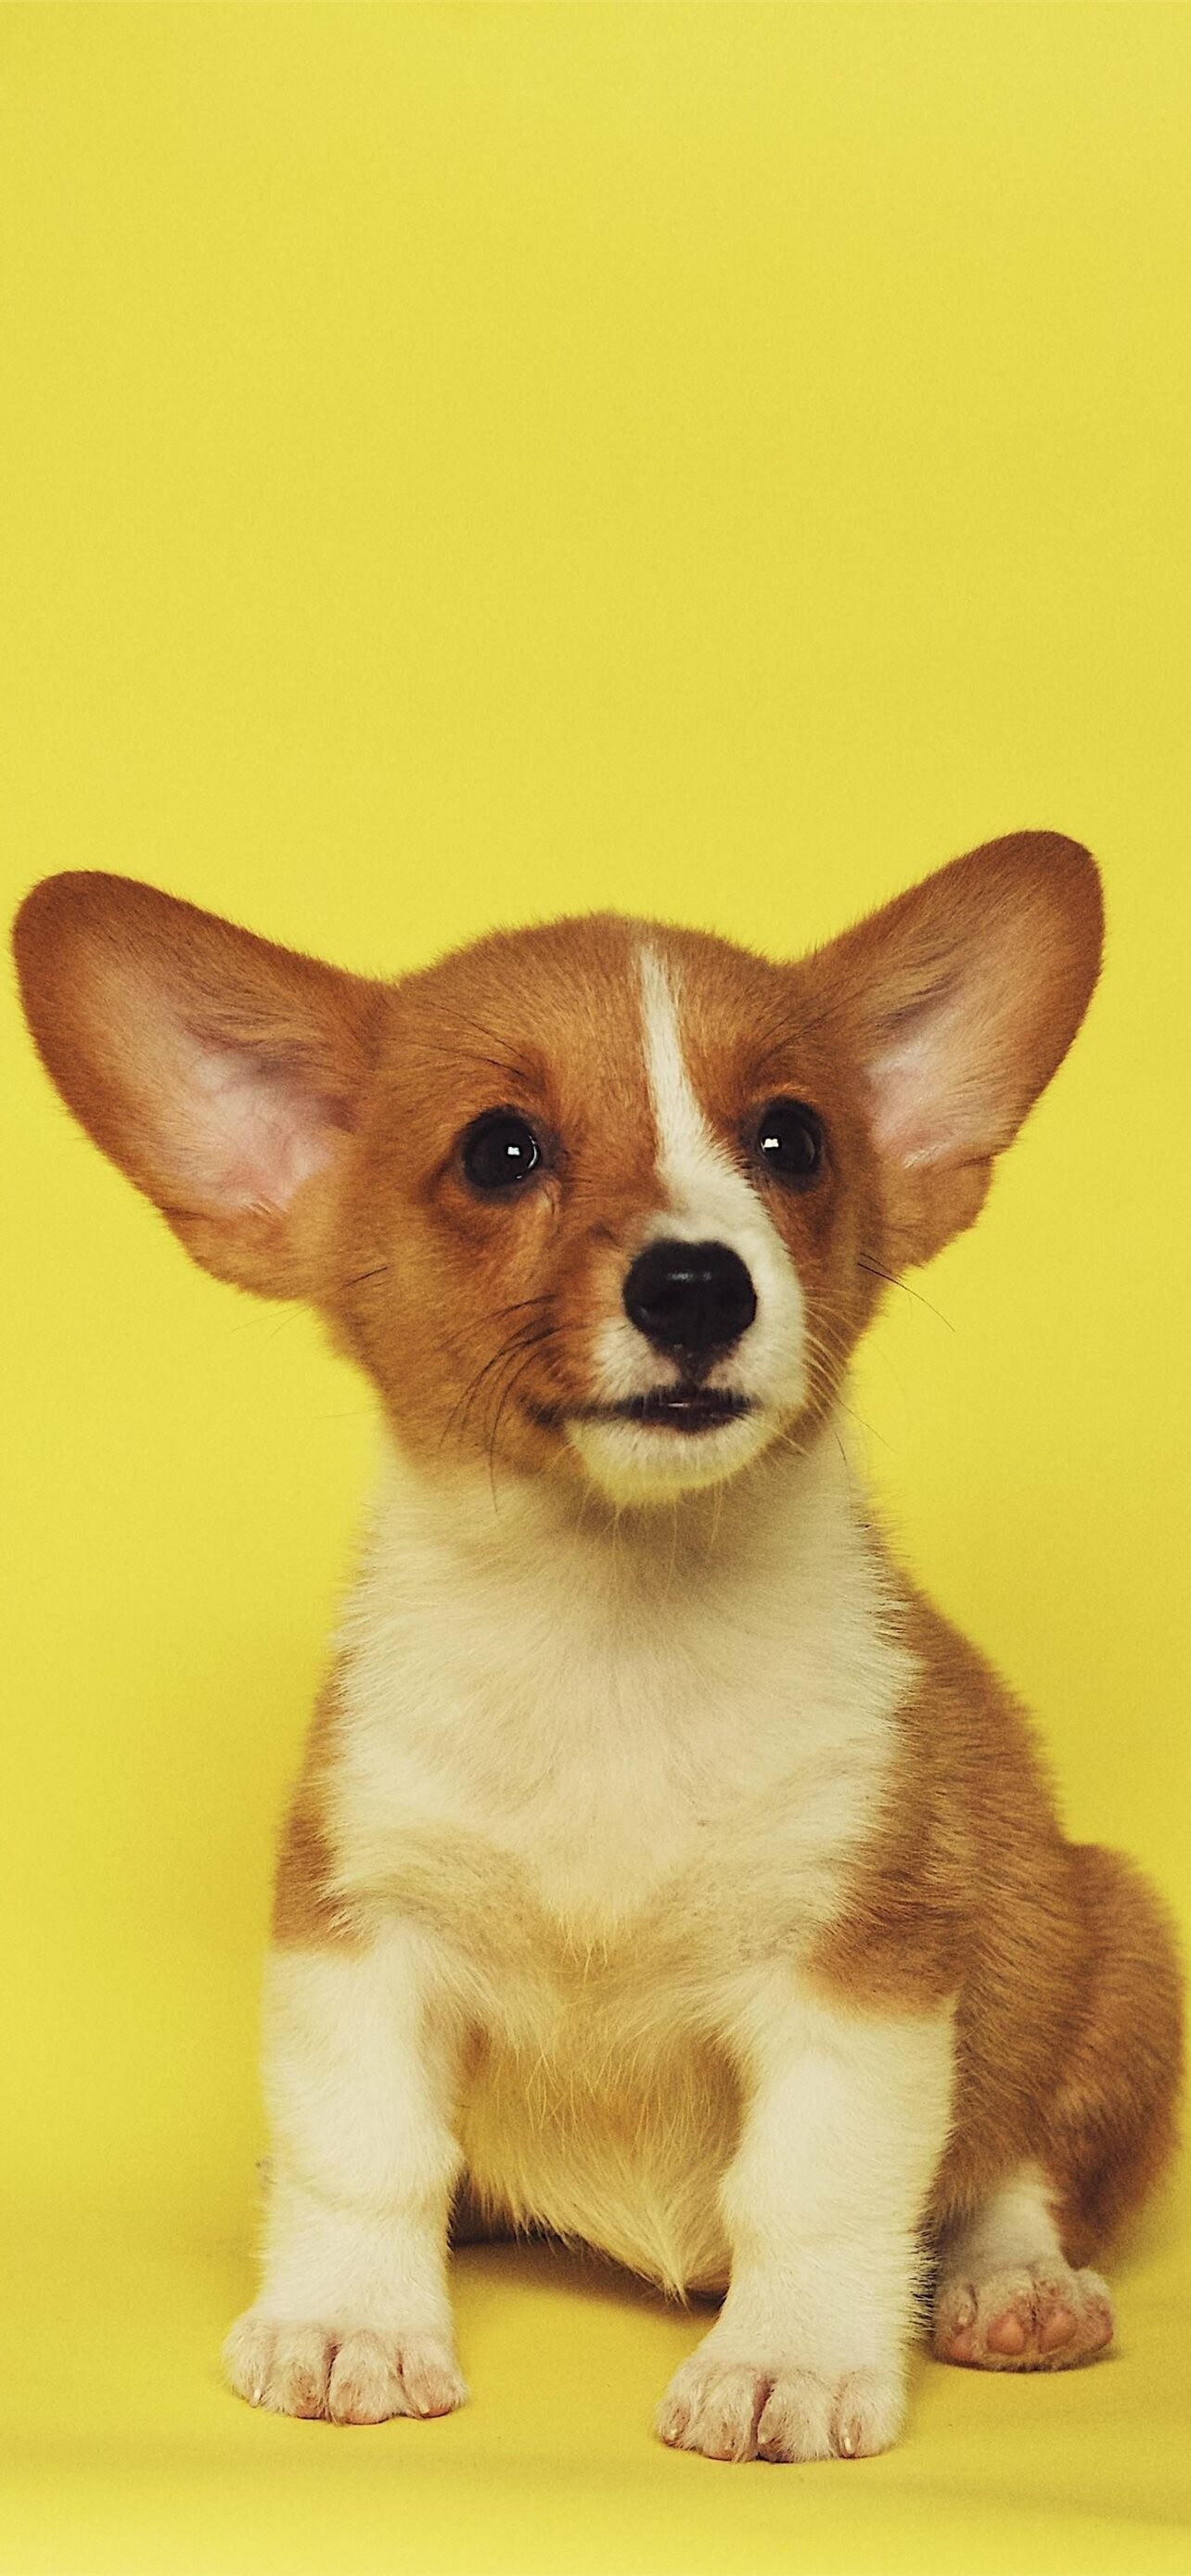 Corgi: Puppy, The Cardigan and the Pembroke, are named for the county in Wales where they originated. 1290x2780 HD Background.